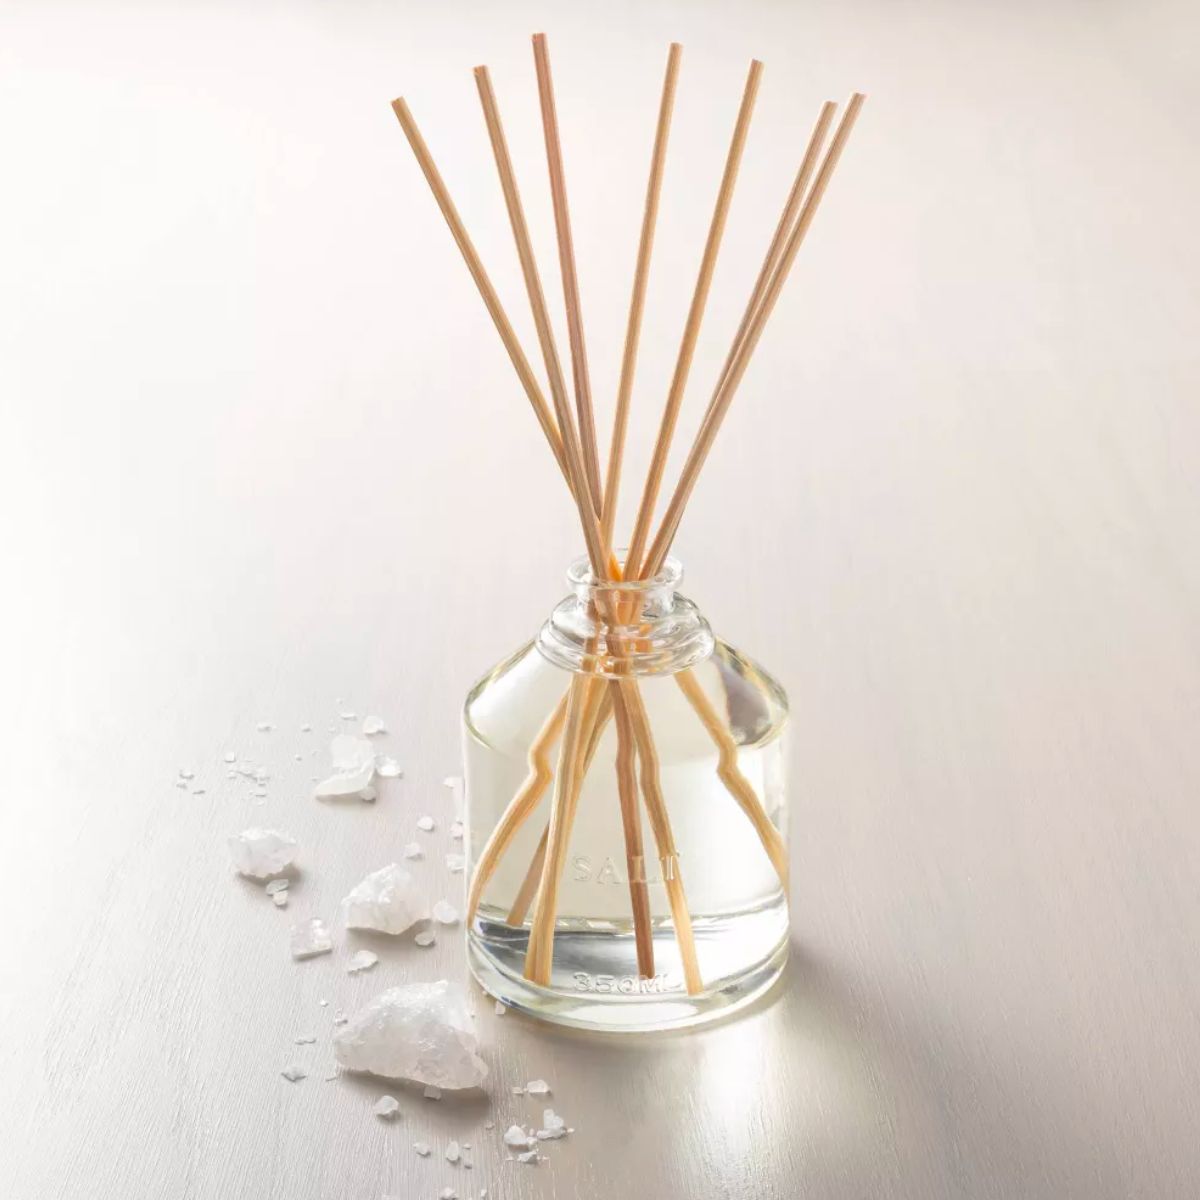 Magnolia Salt Oil Reed Diffuser sitting on a table next to various large salt crystals